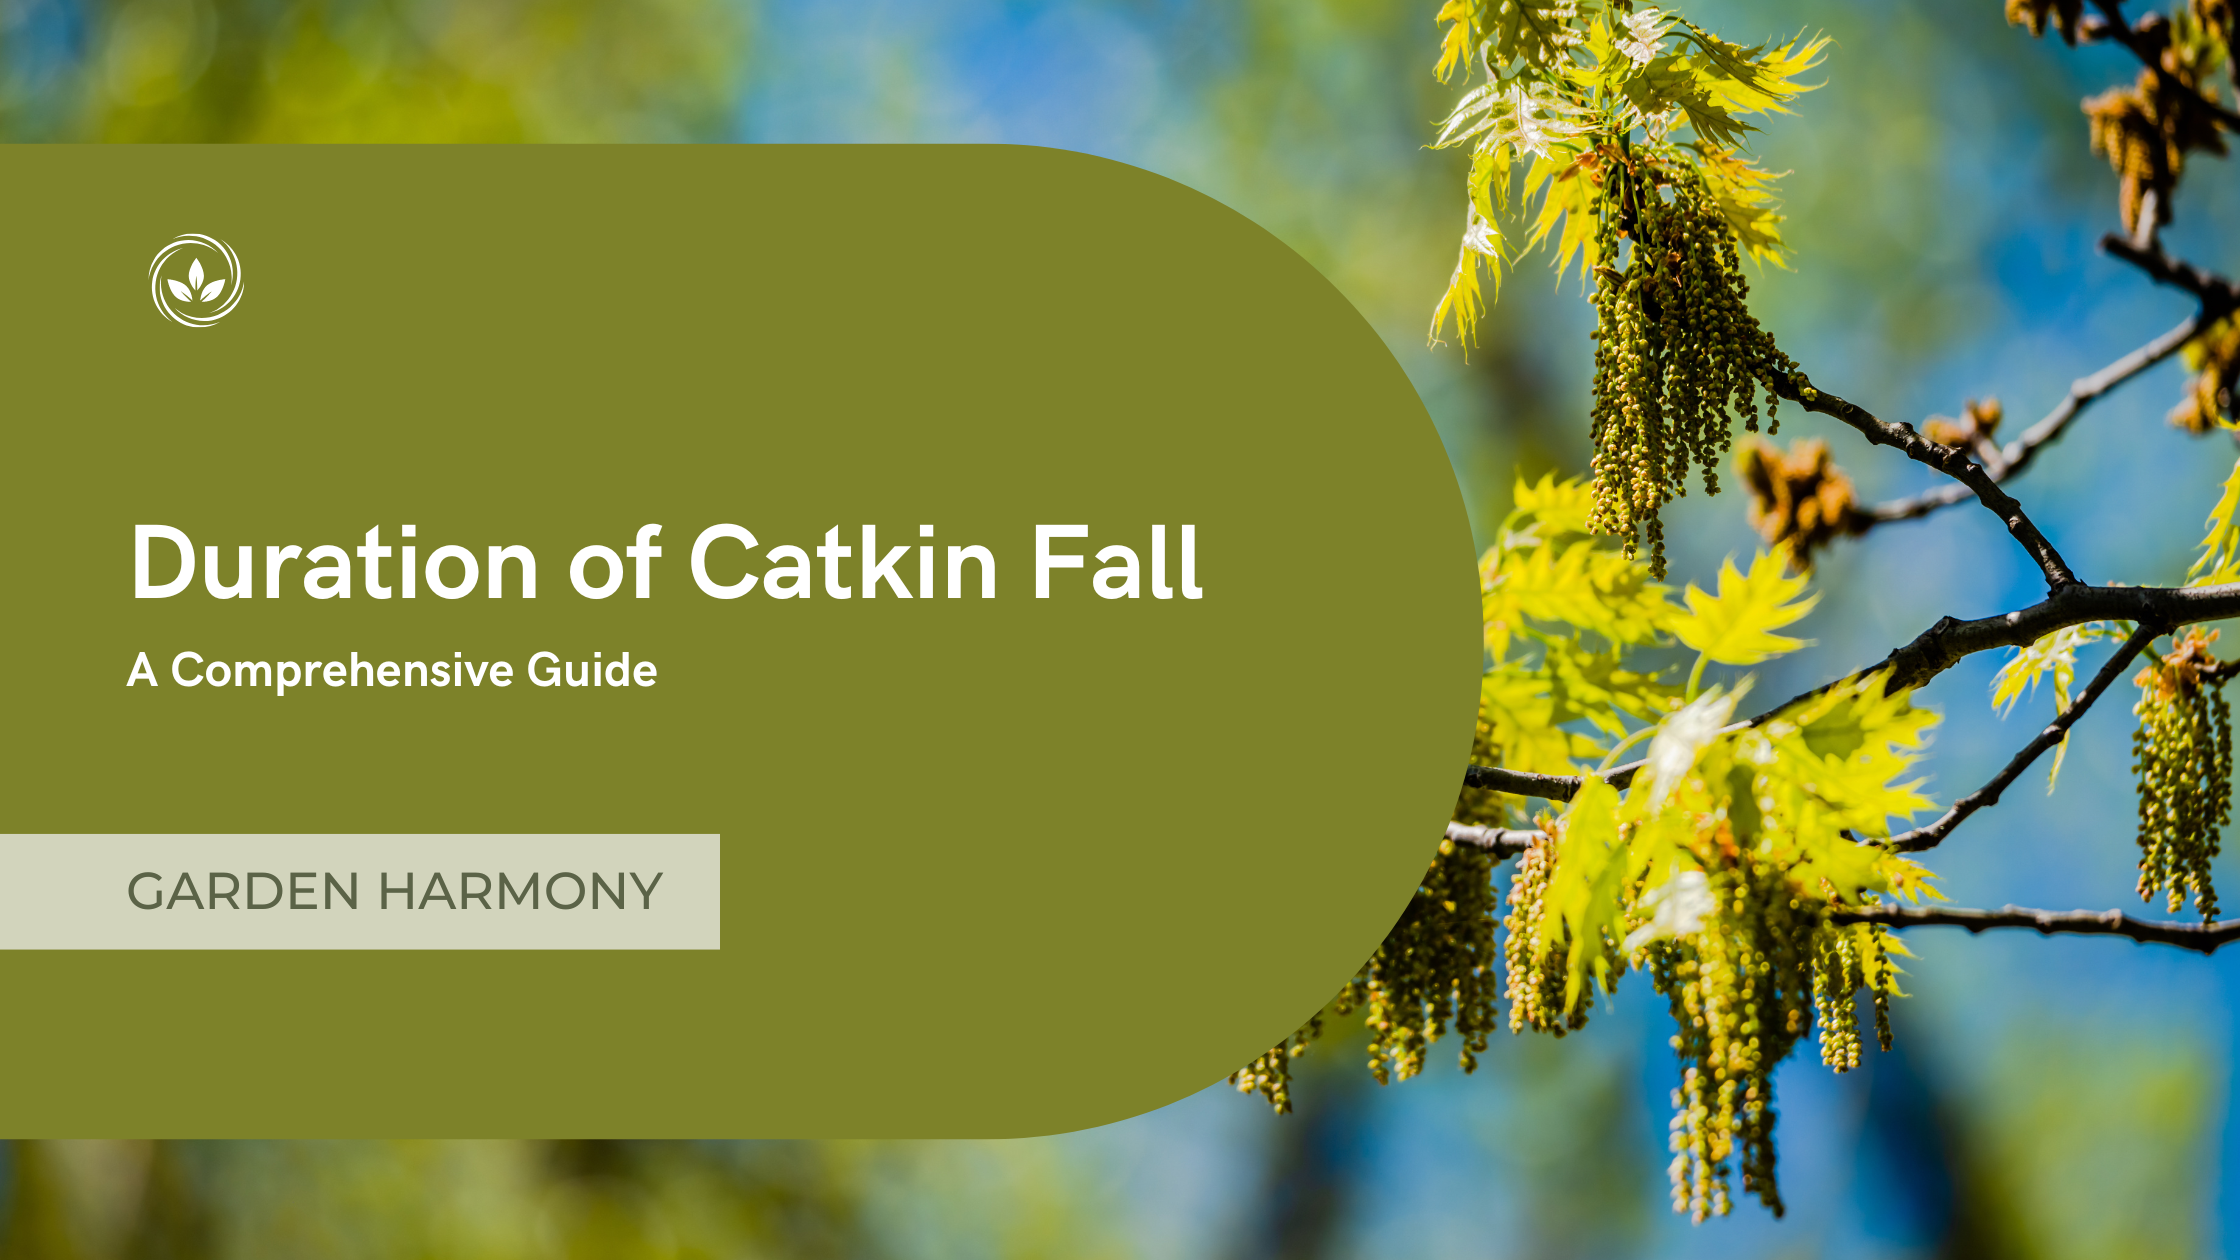 Duration of Catkin Fall